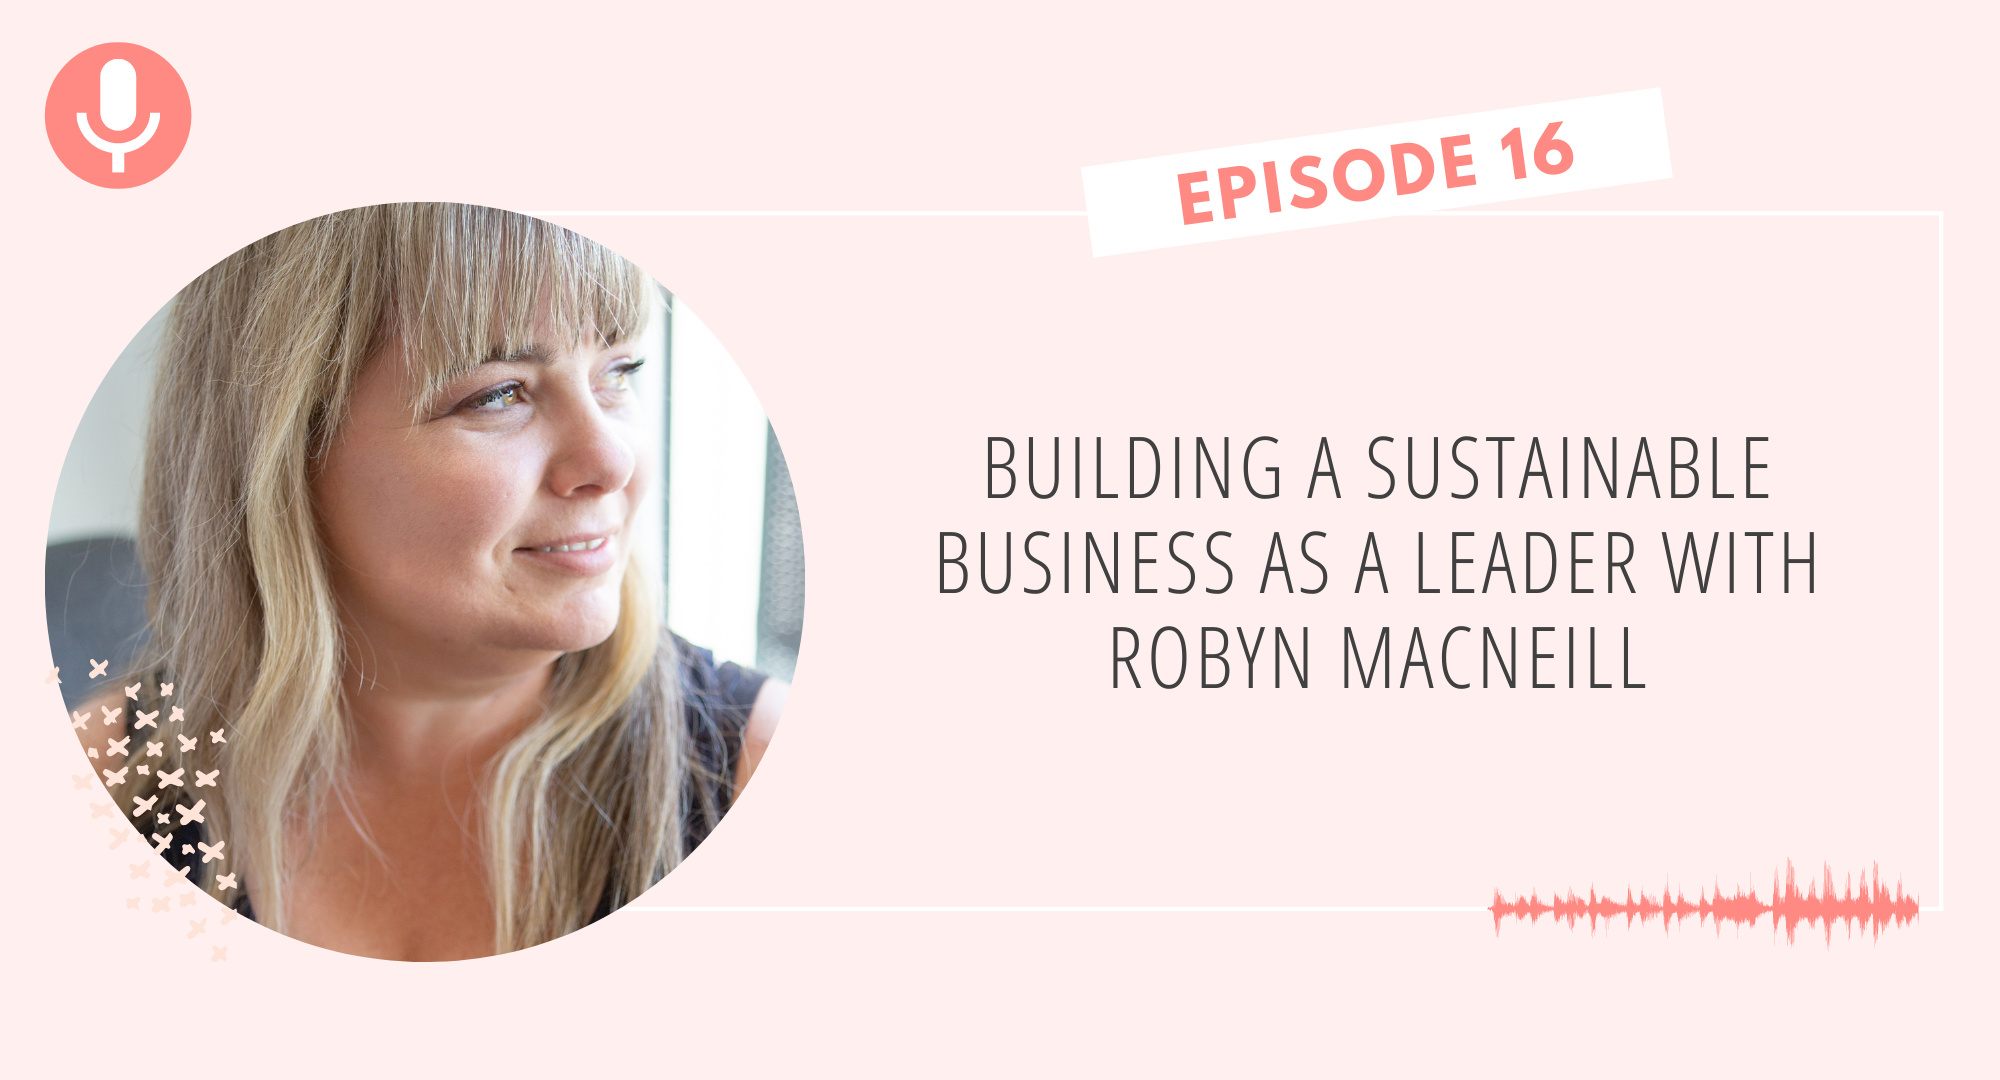 Building a Sustainable Business as a Leader with Robyn MacNeill